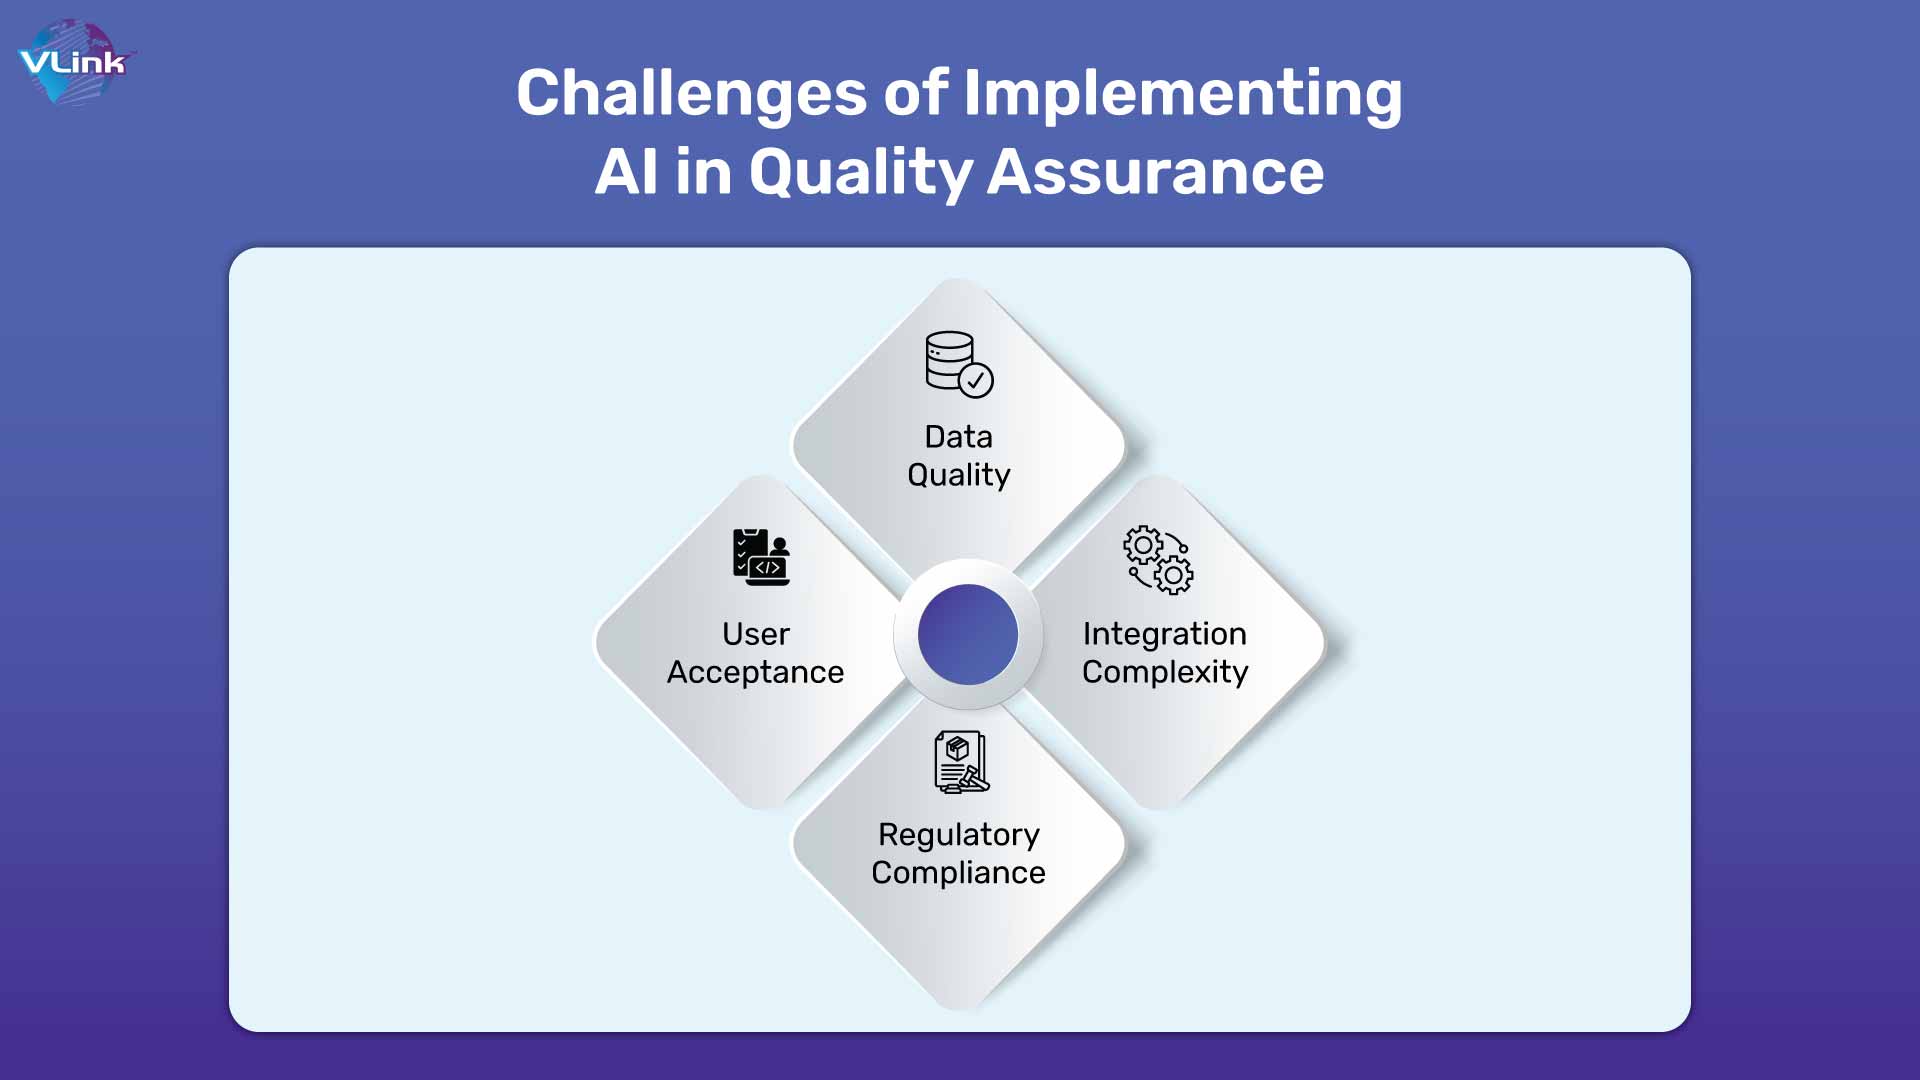 Challenges of Implementing AI in Quality Assurance